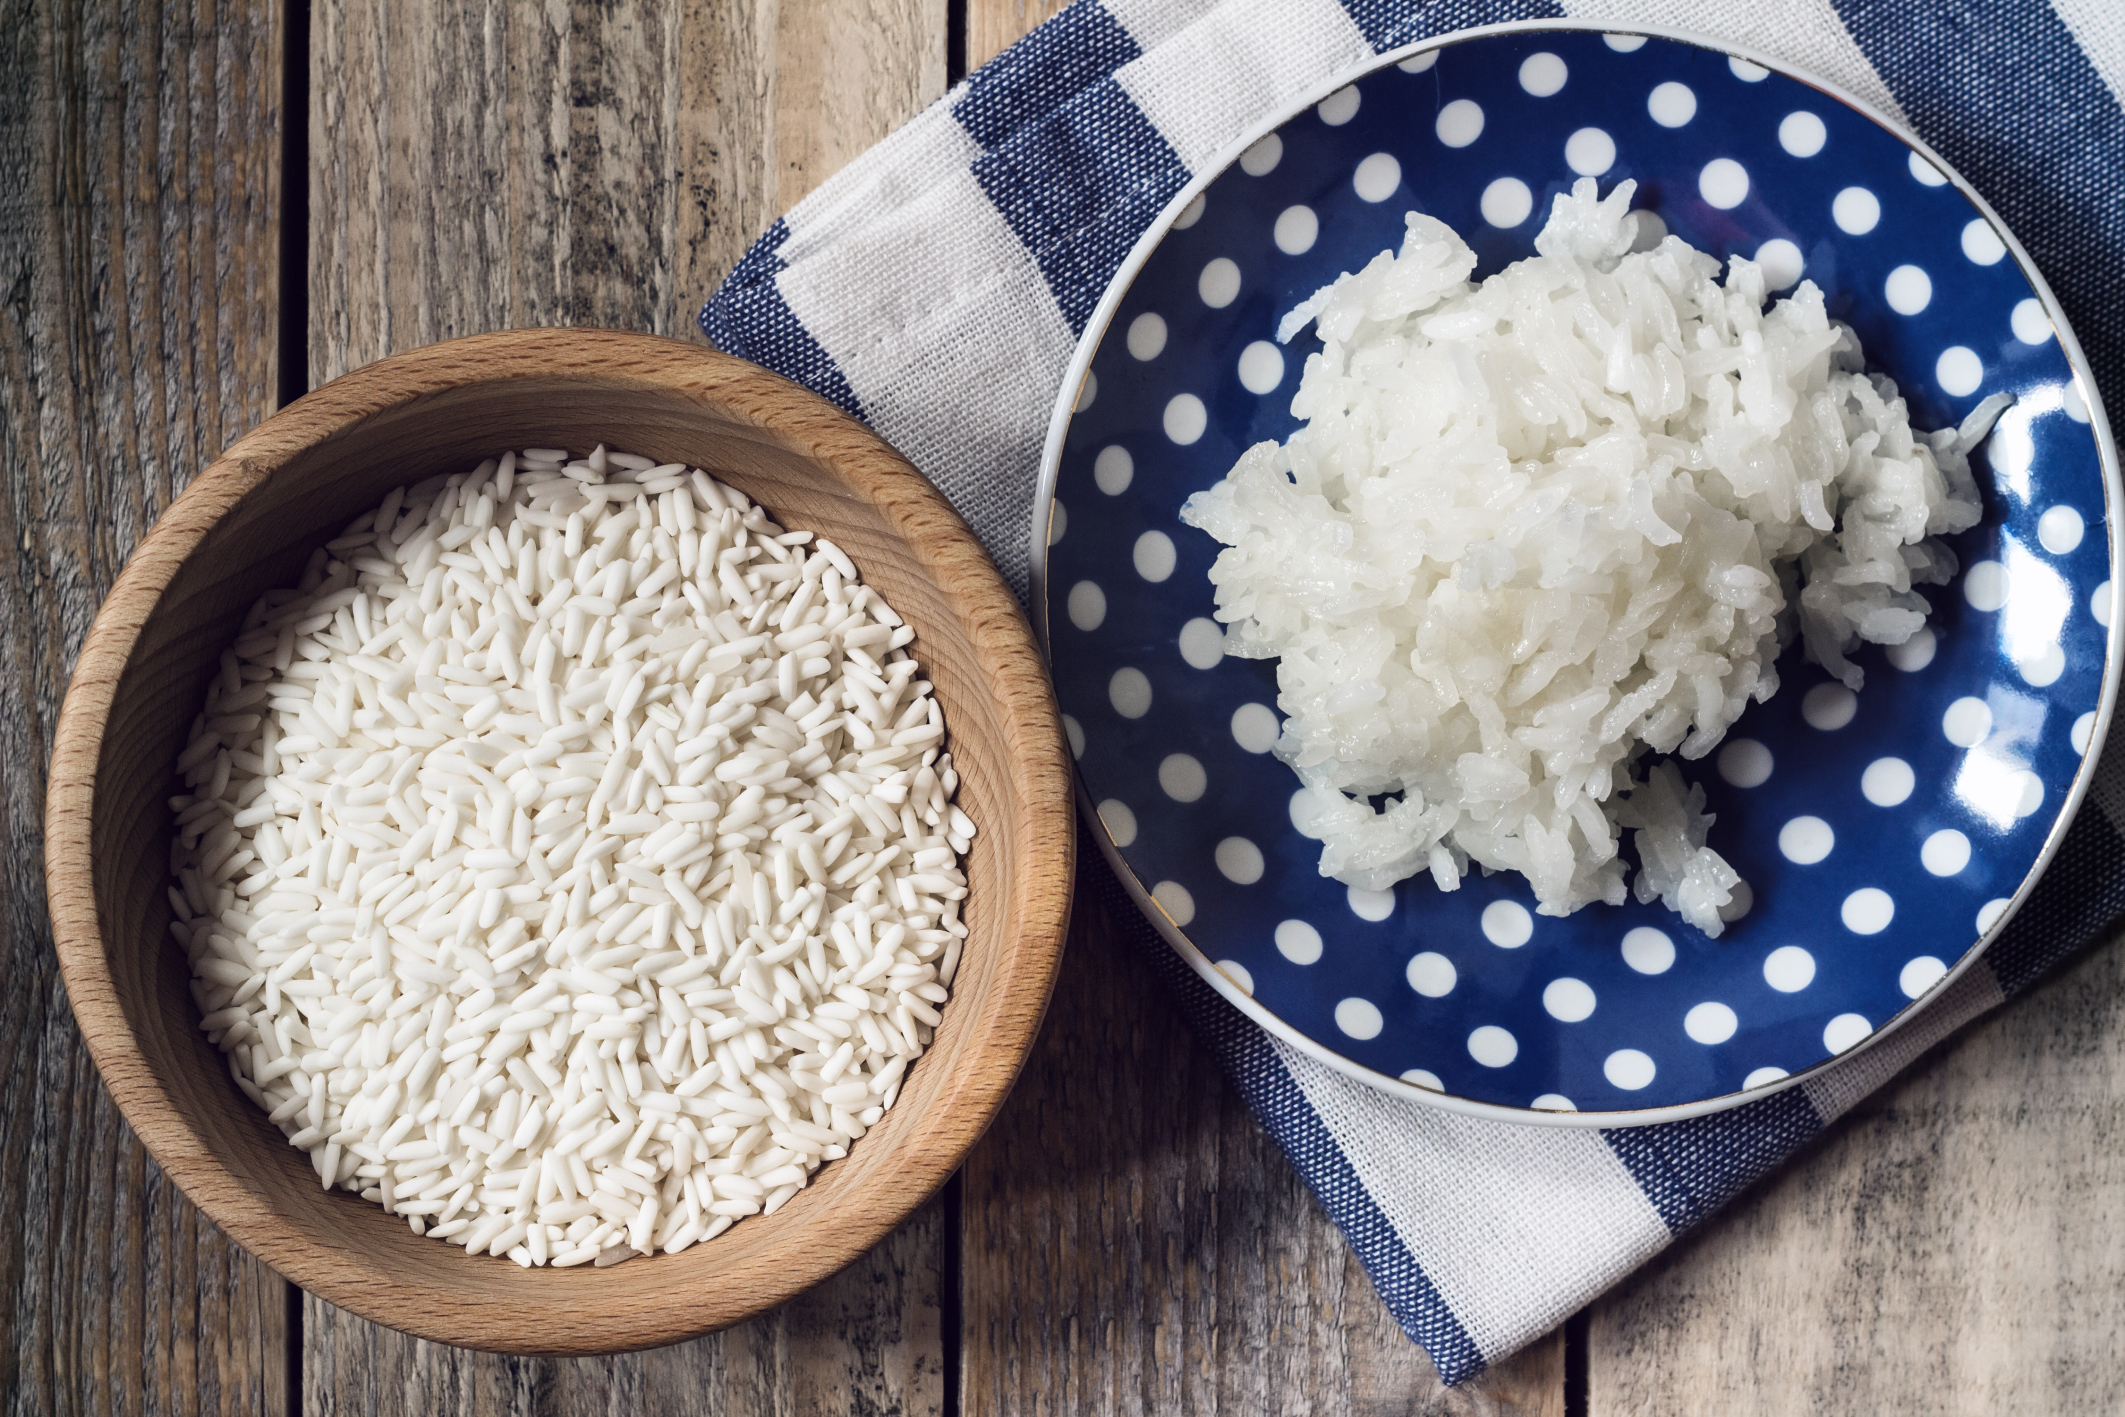 Why is sticky rice unhealthy?